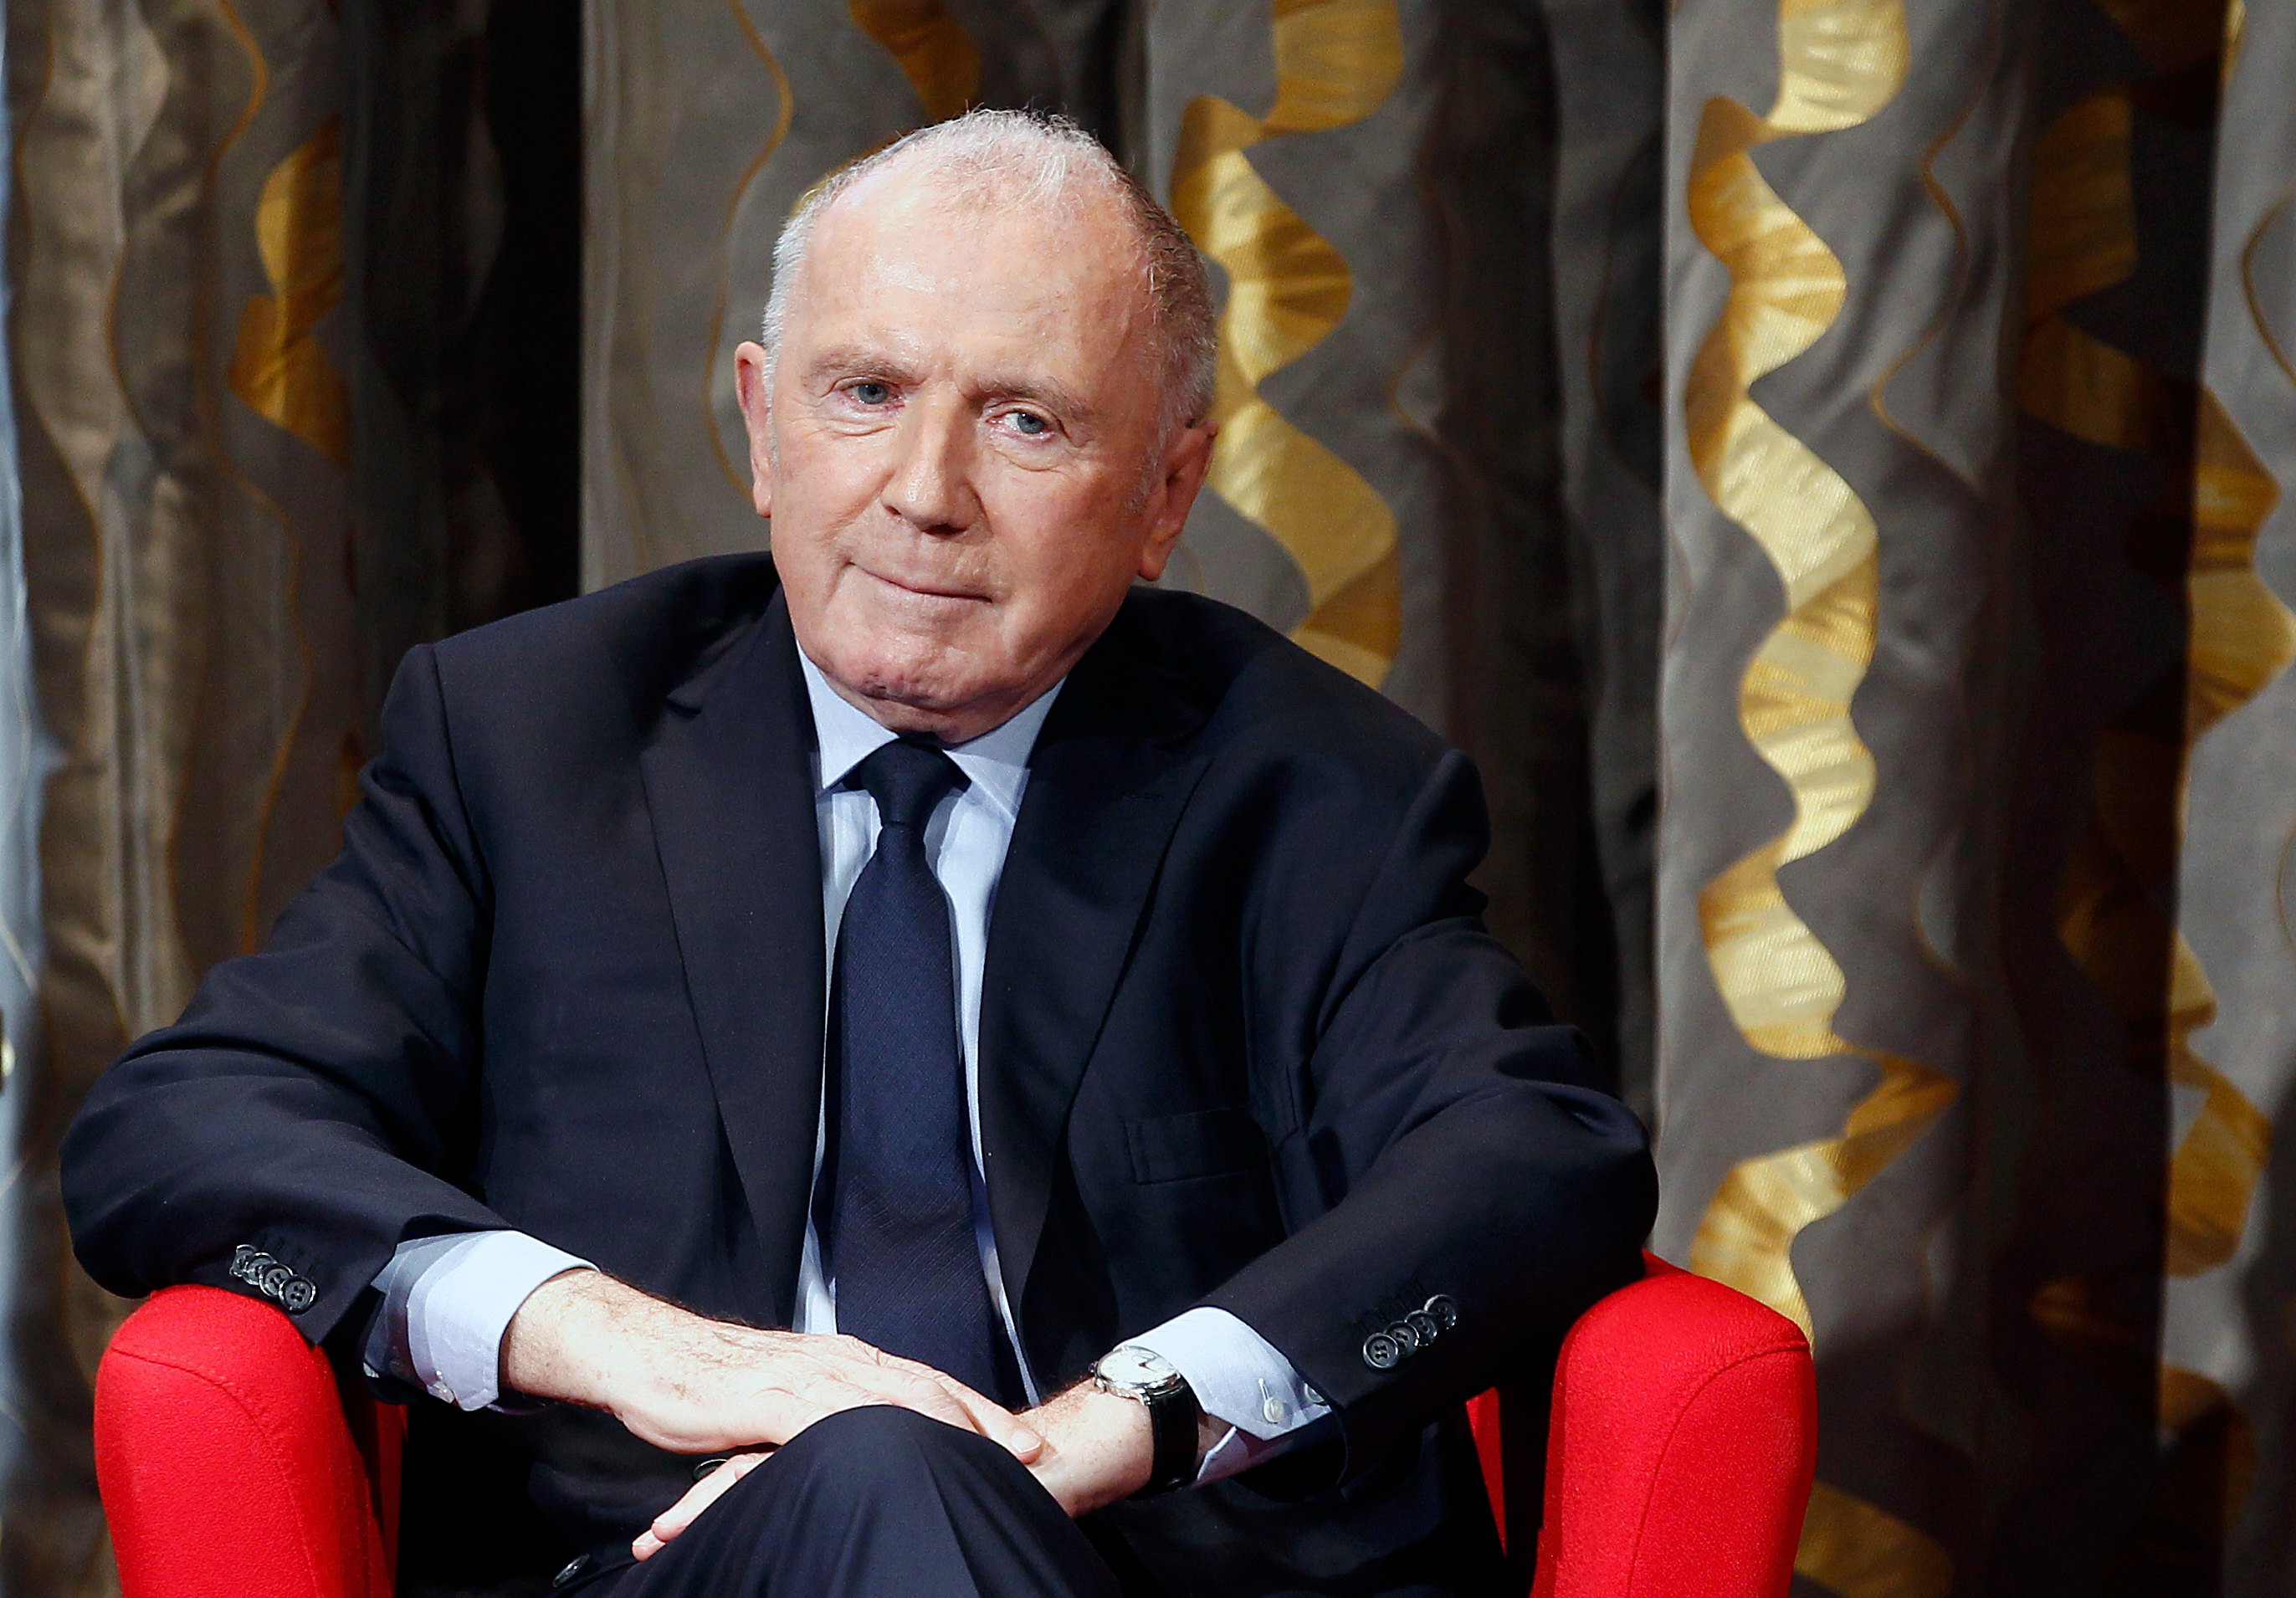 François Pinault Life and Career: From Founding Kering to Buying Gucci